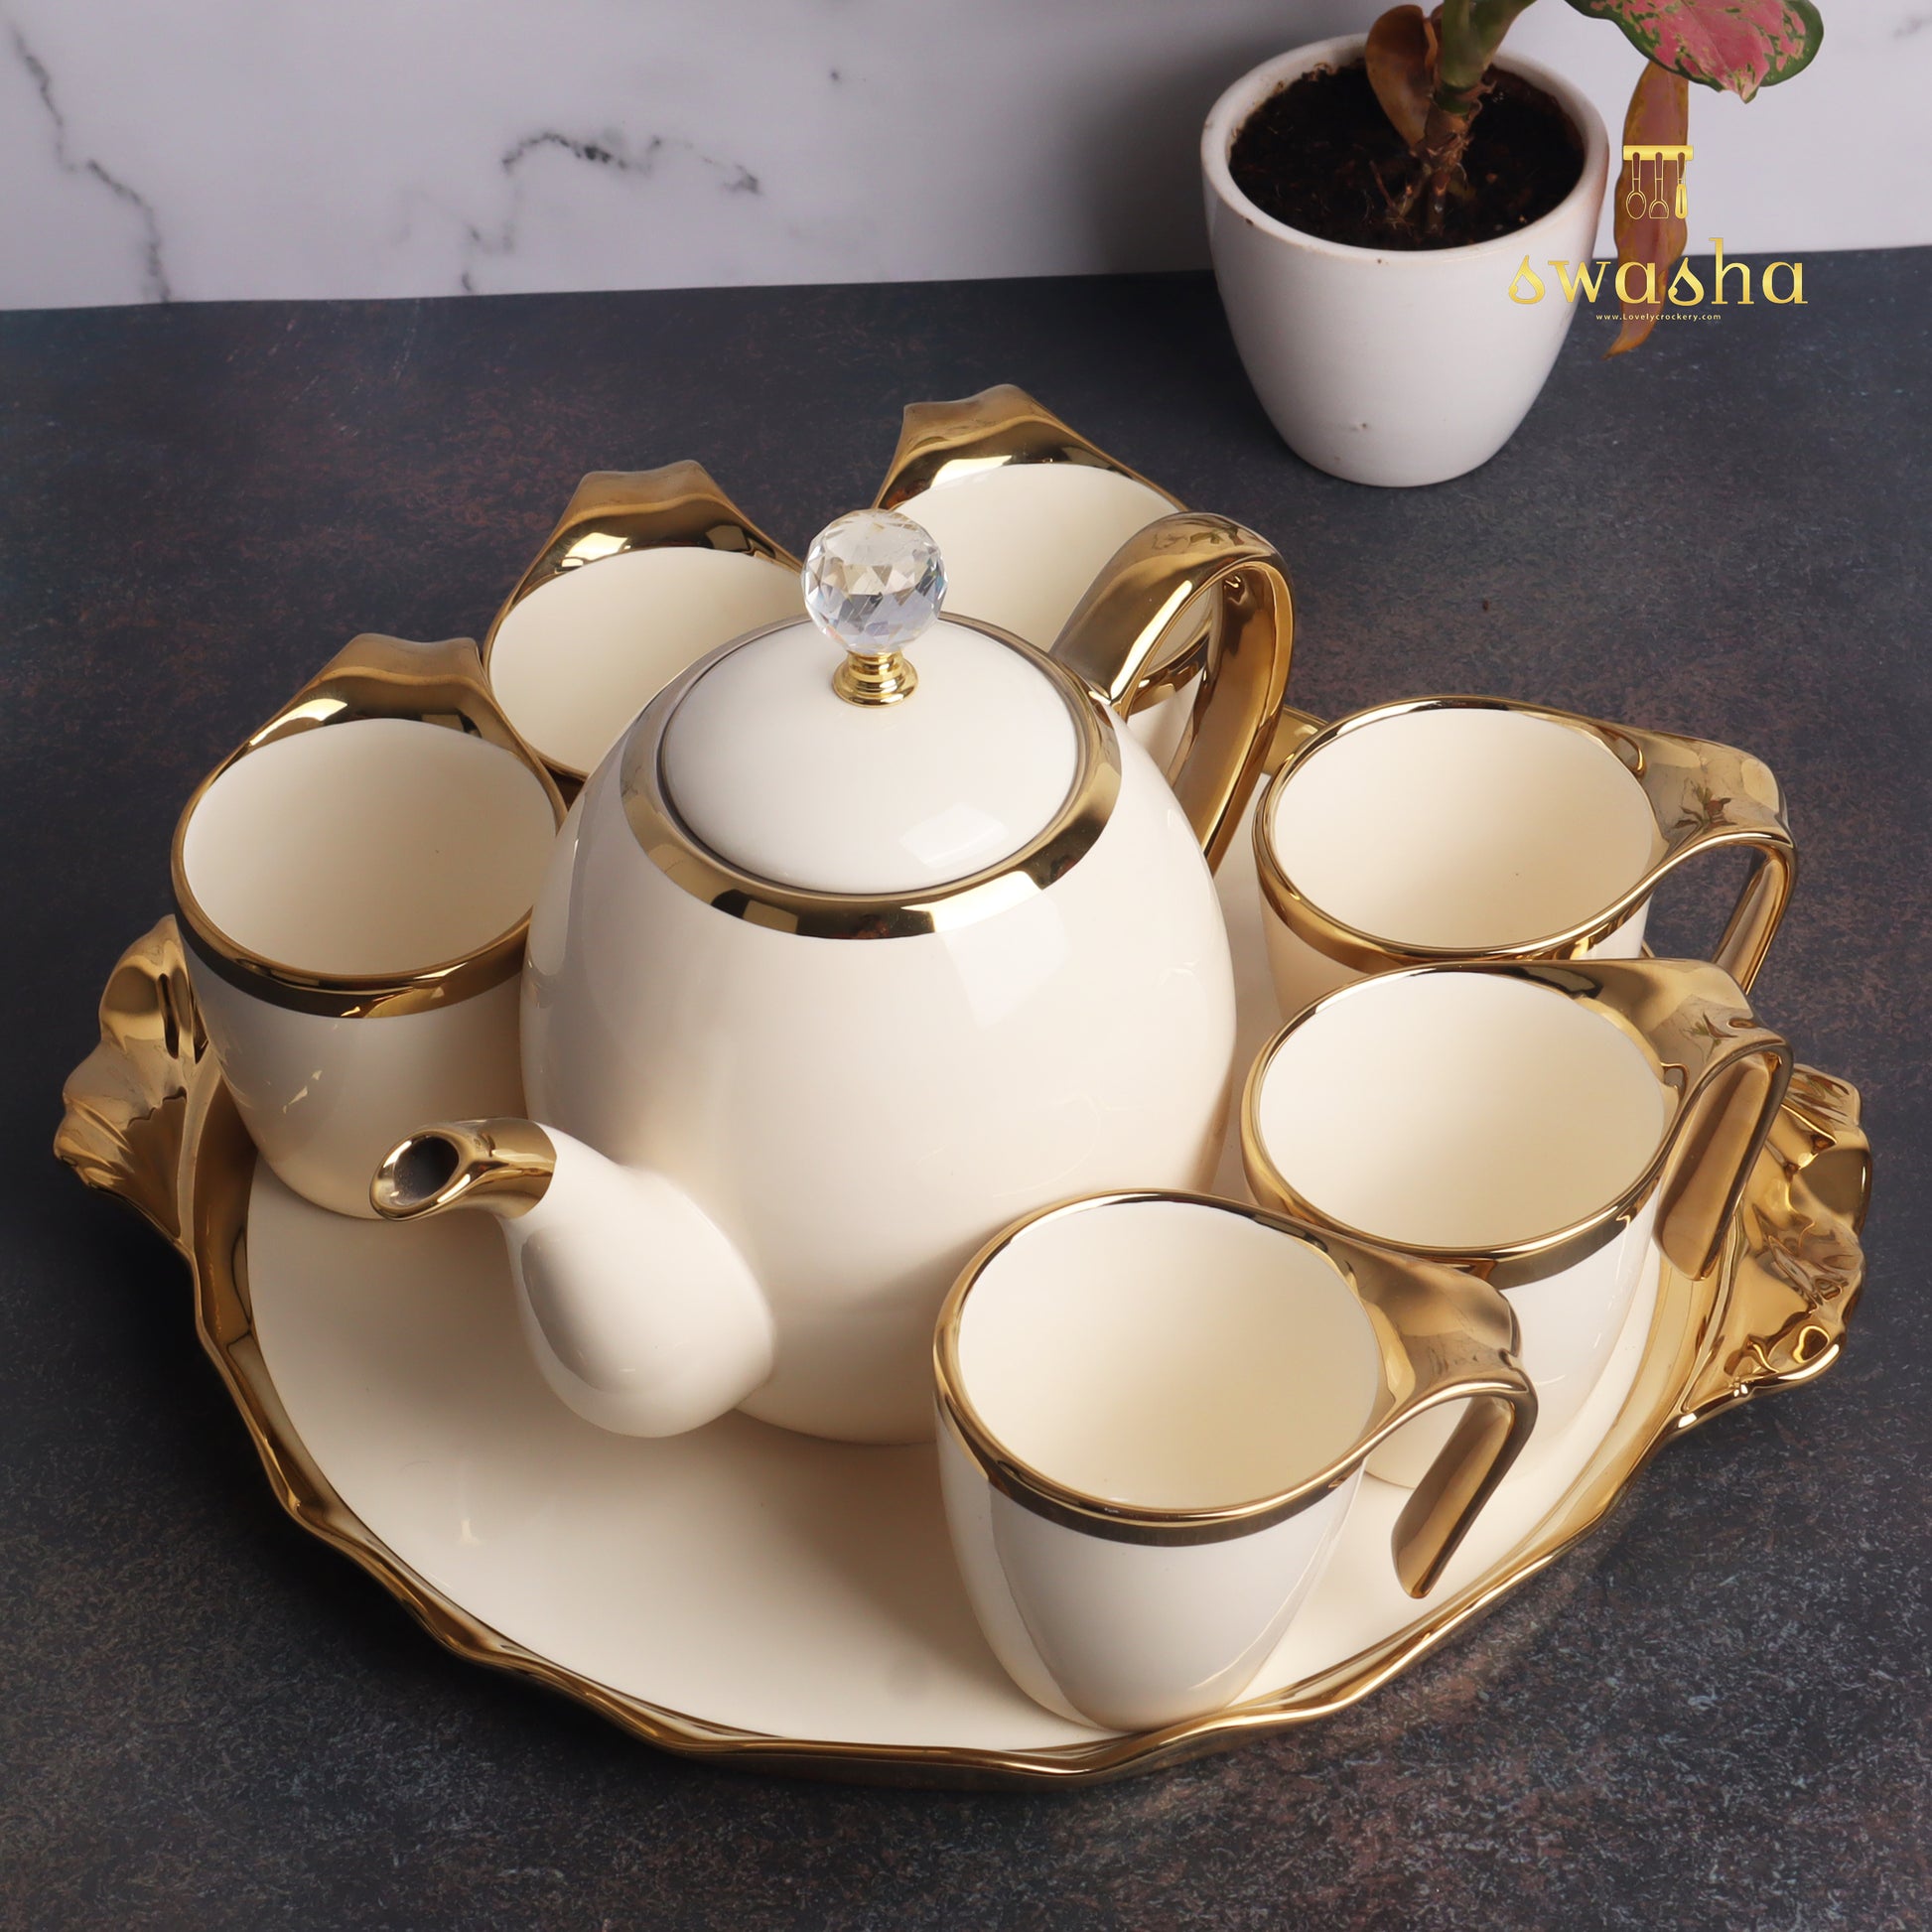 Set of 6 ceramic cups with matching kettle - perfect for delightful tea sessions